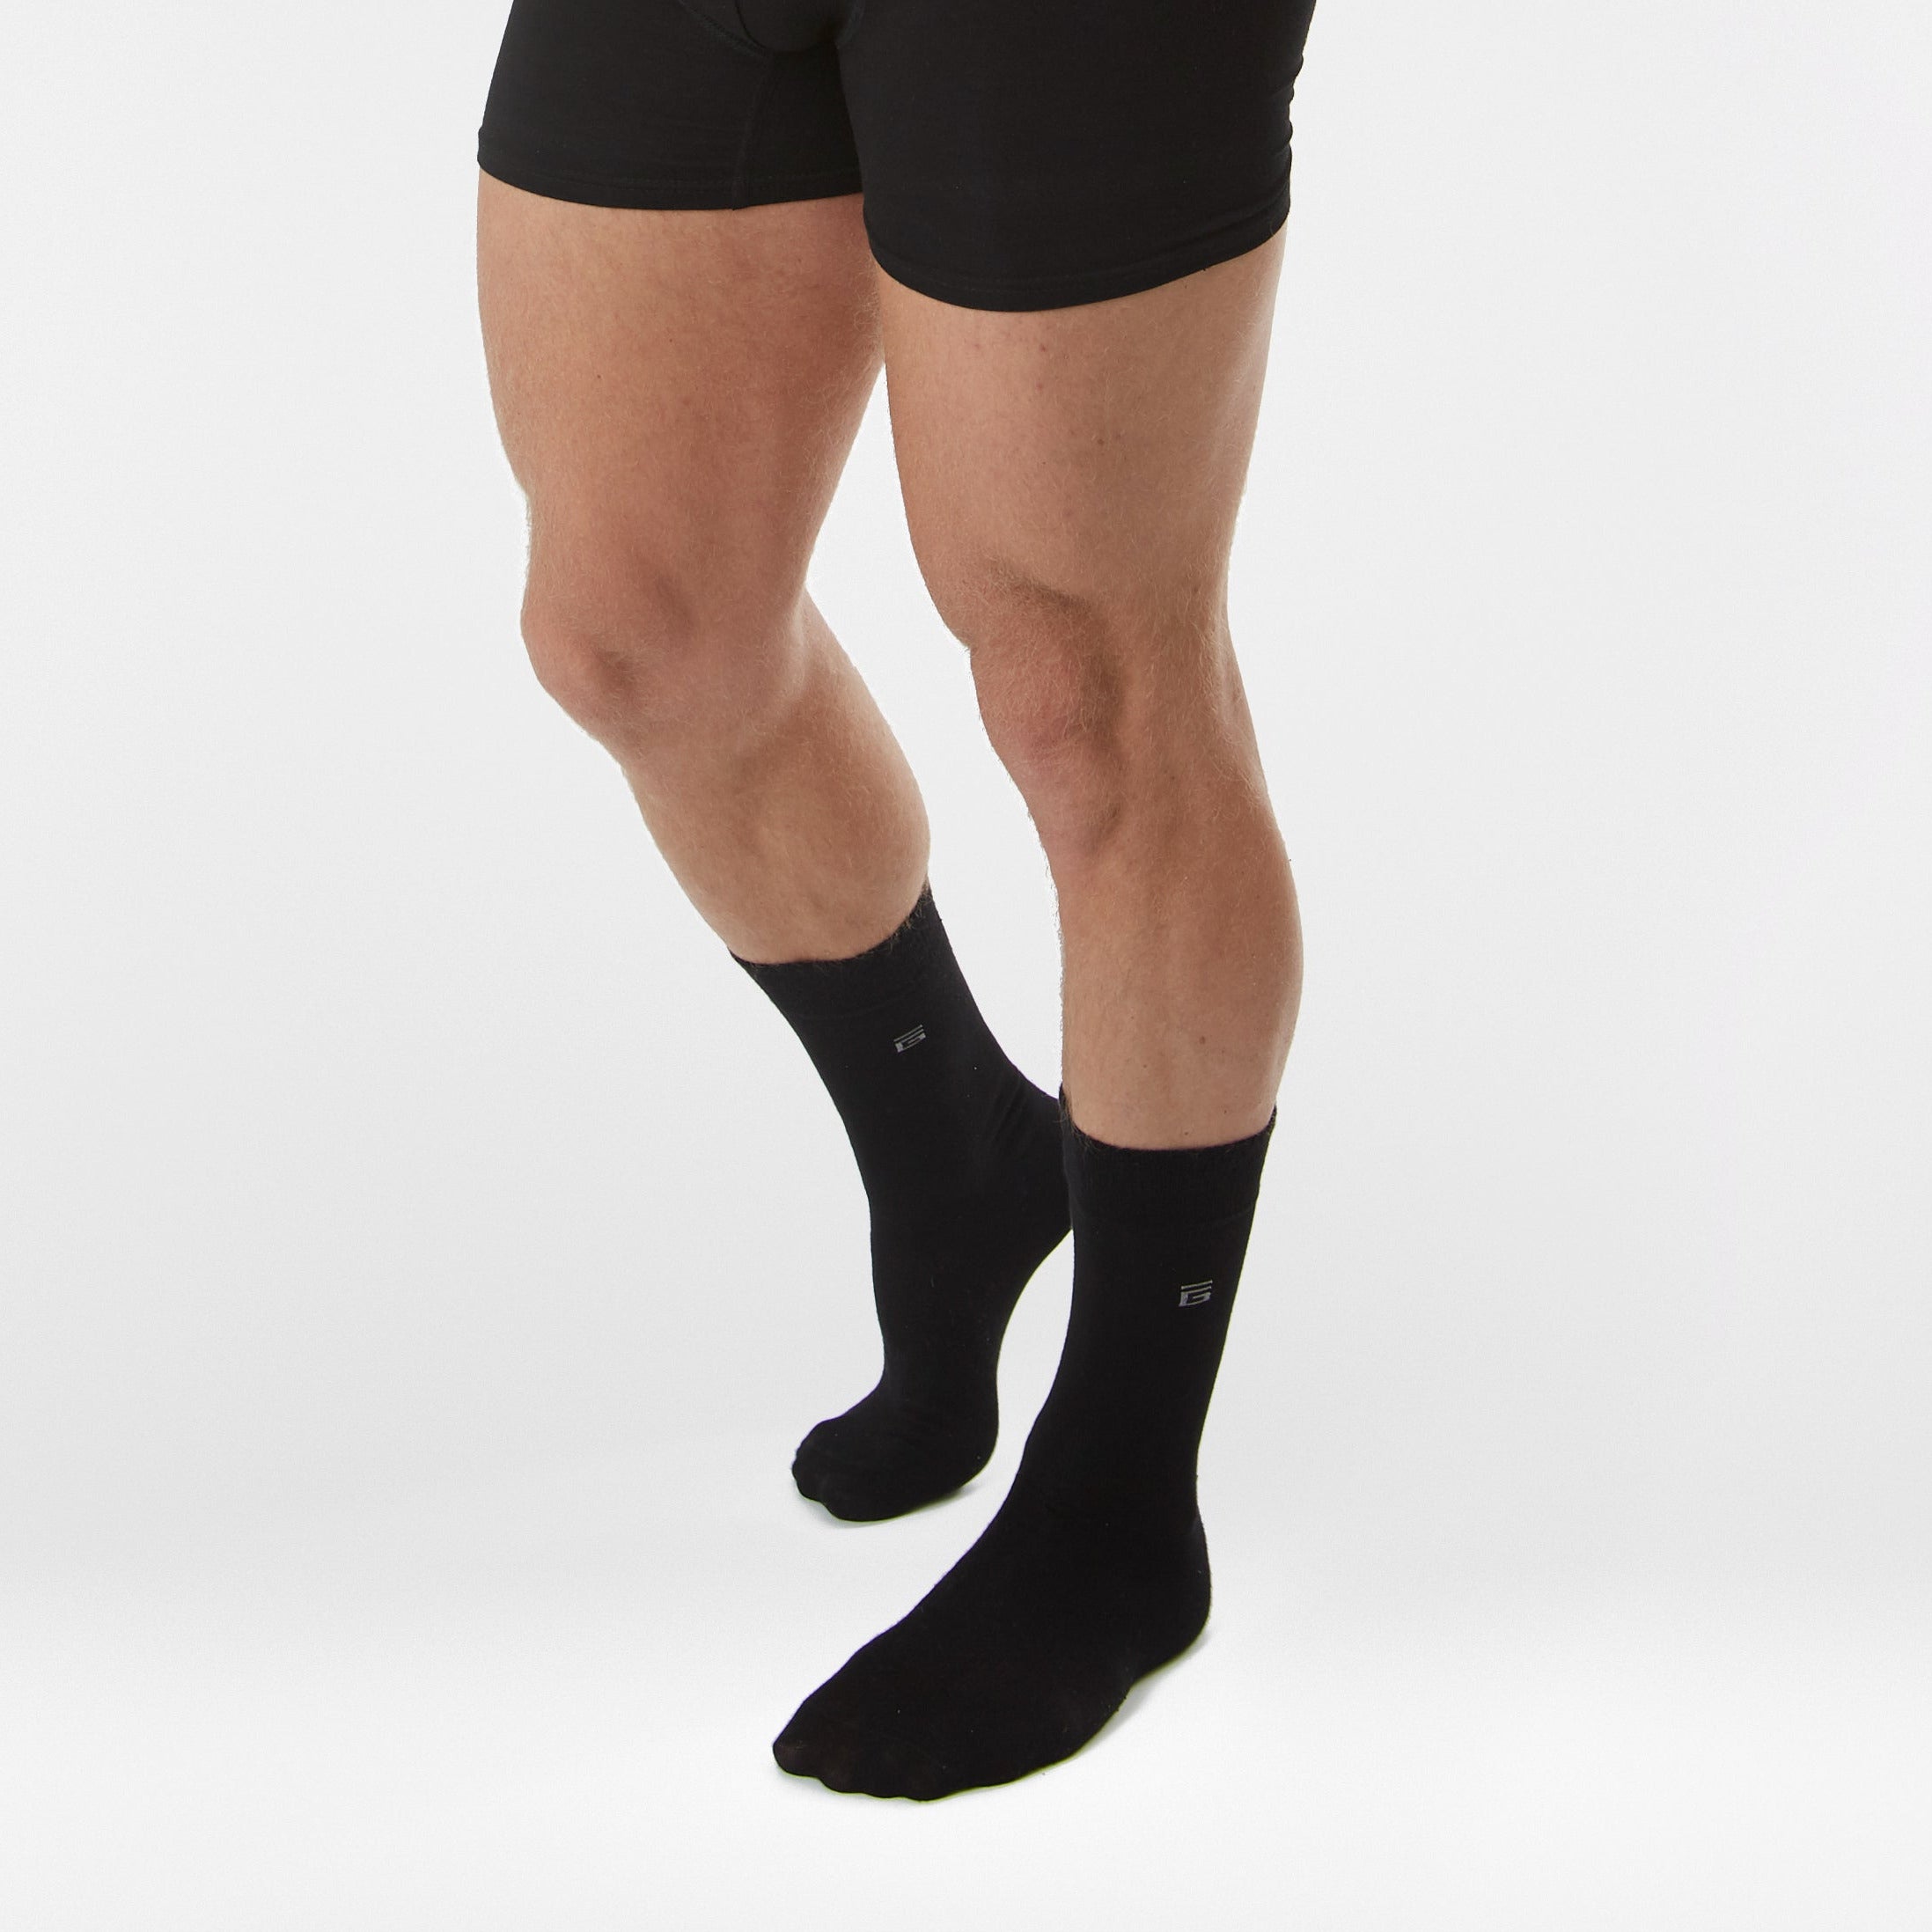 The Bamboo Mid-Calf Sock - 5 Pack